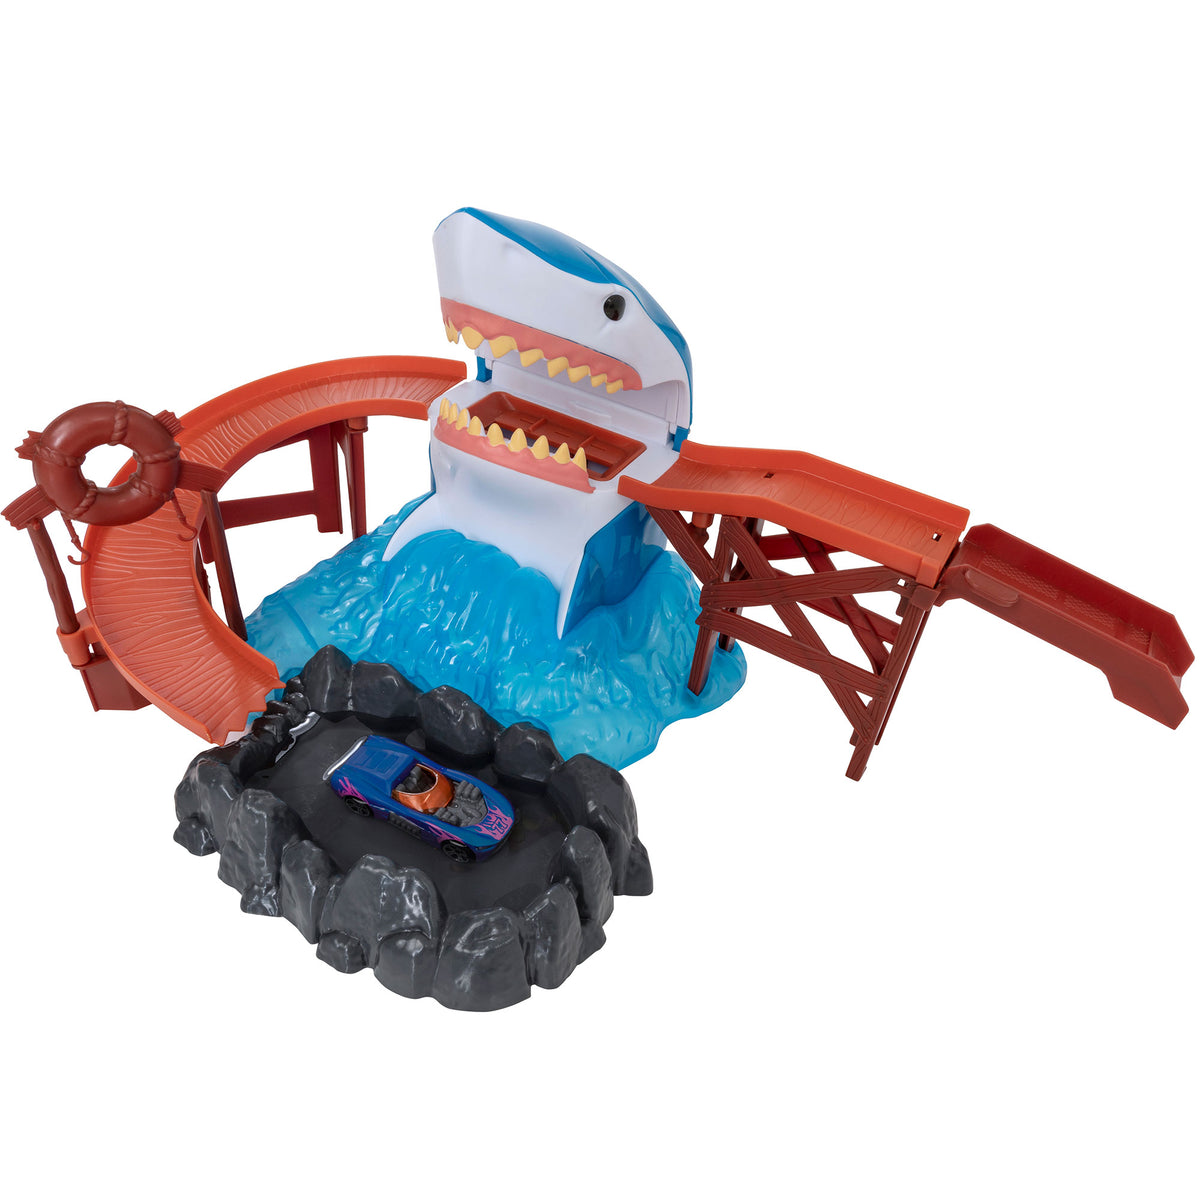 Teamsterz Colour Change Shark Bite Play Set - With 5 Cars